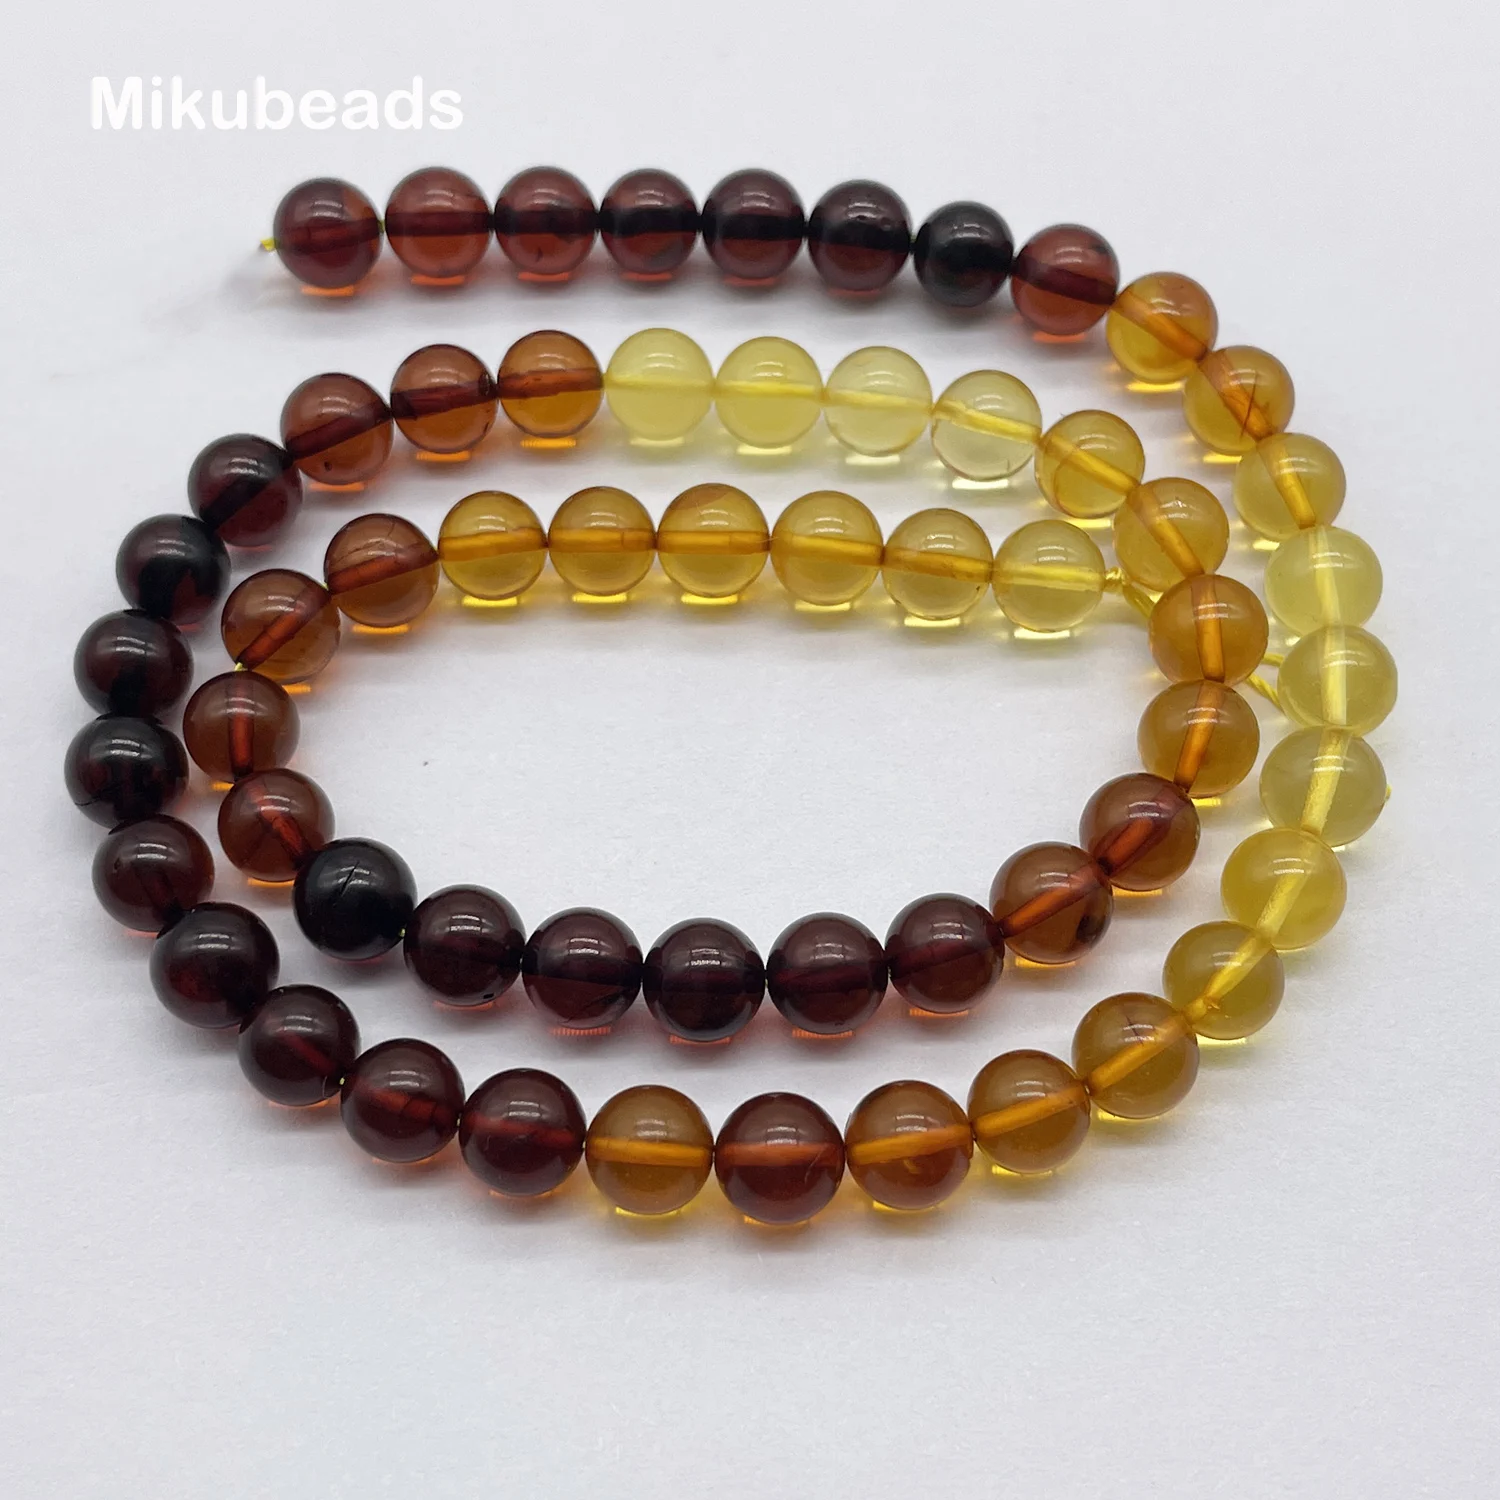 Wholesale Natural 6mm 8mm Baltic Sea Amber Smooth Round Loose Beads For ... - $20.39